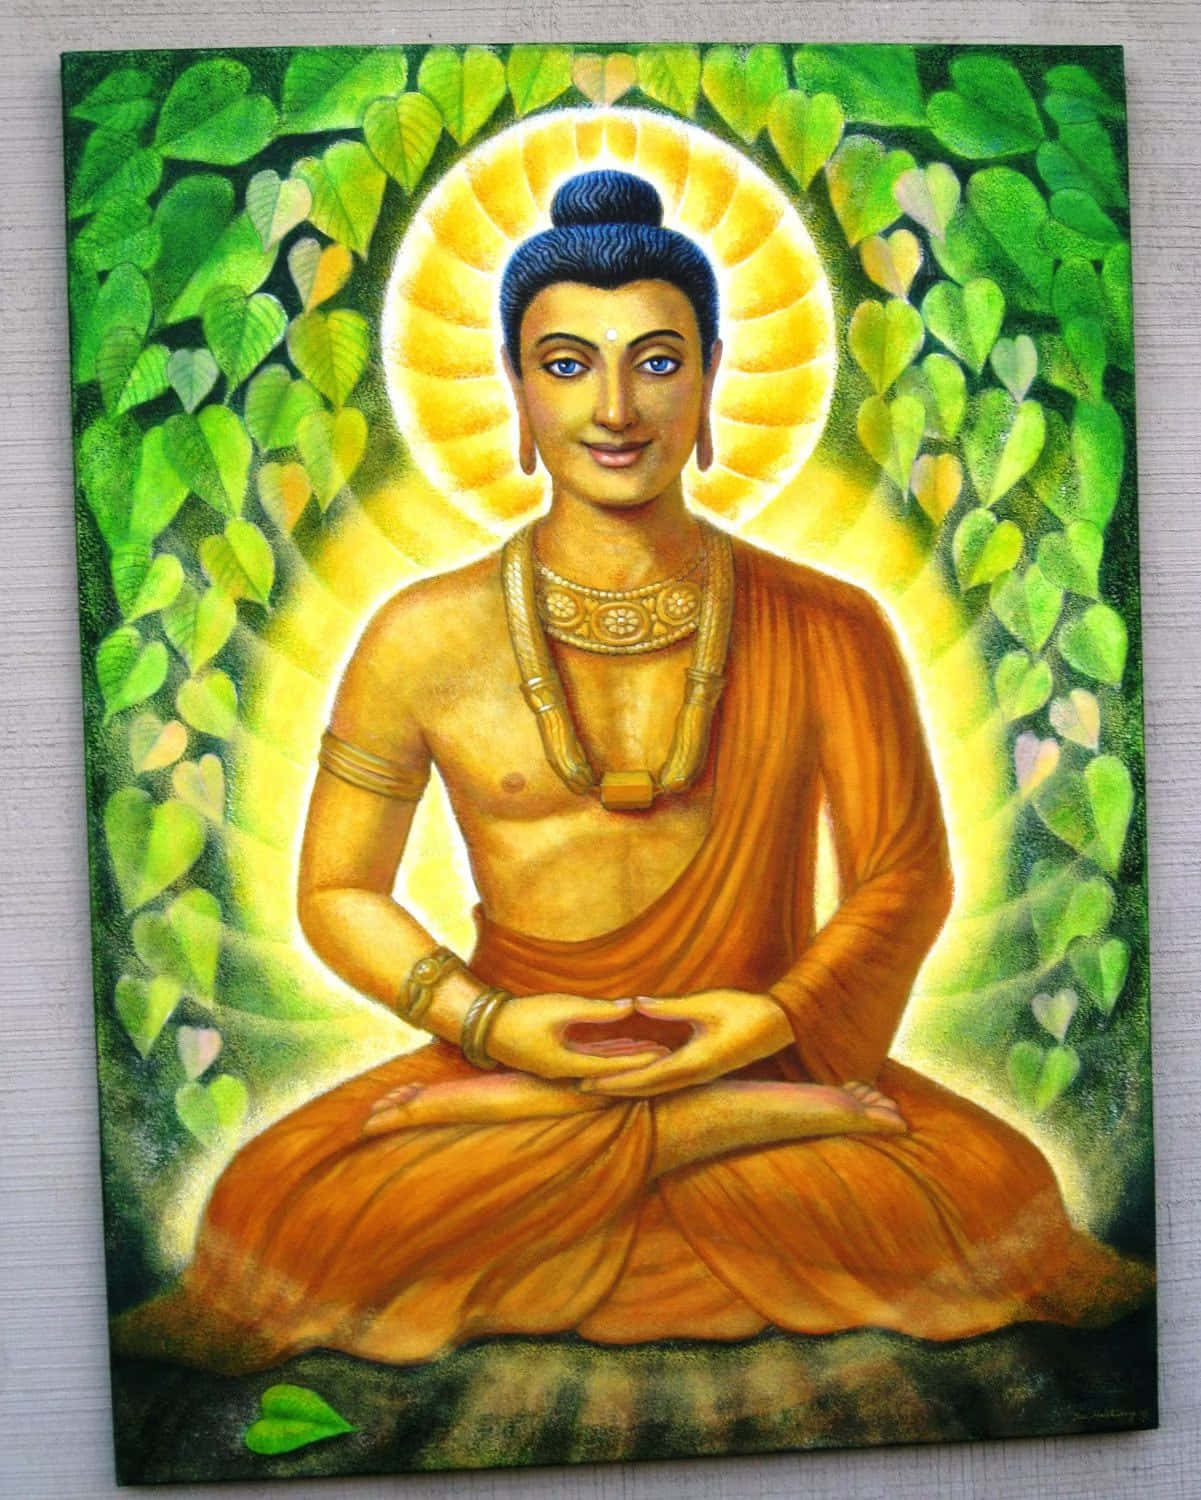 A Painting Of A Buddha Sitting In A Lotus Pose